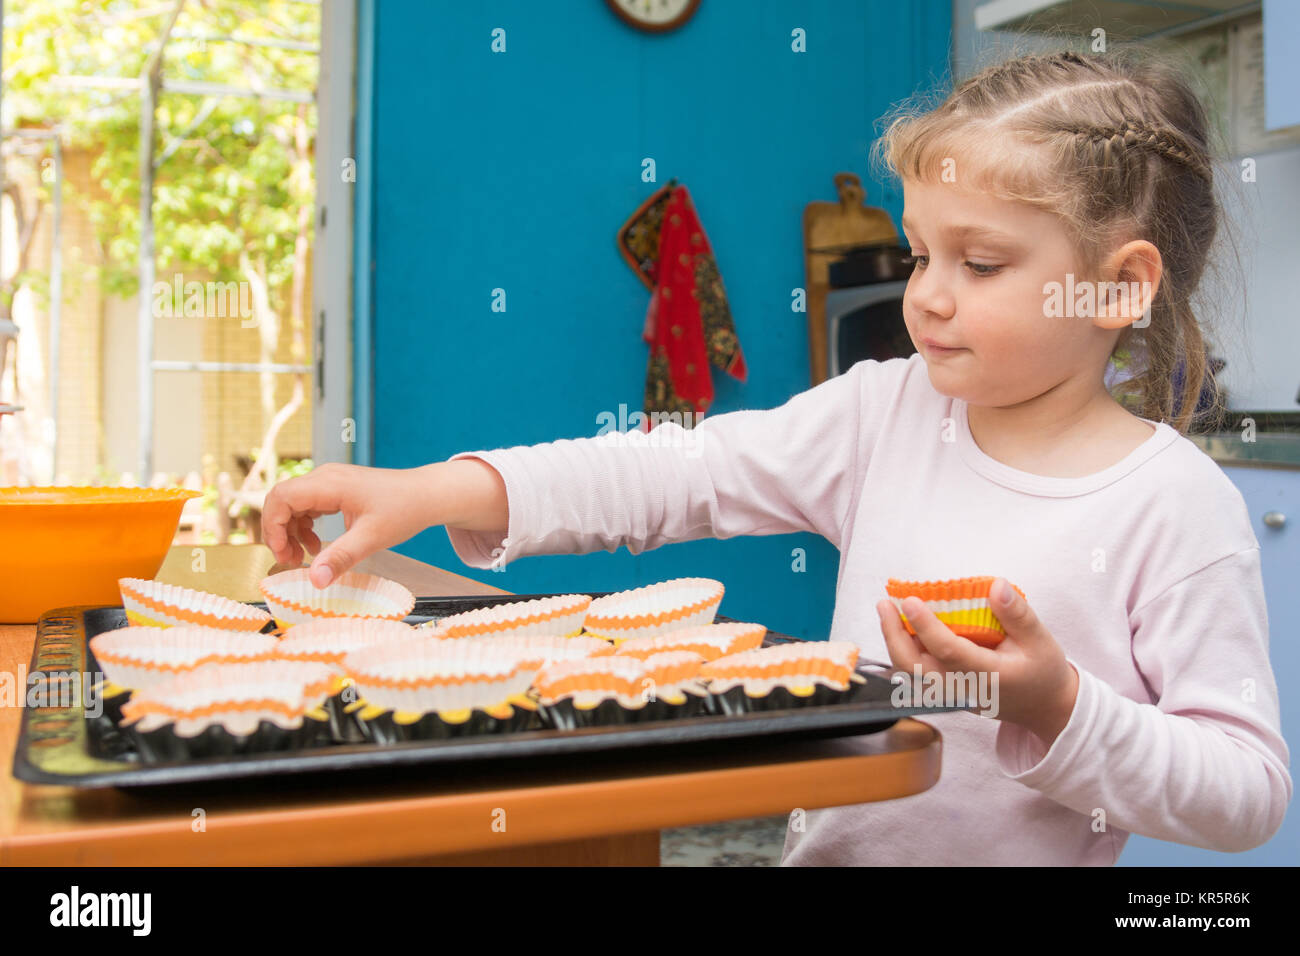 The child lays on a baking tins Easter cupcakes Stock Photo